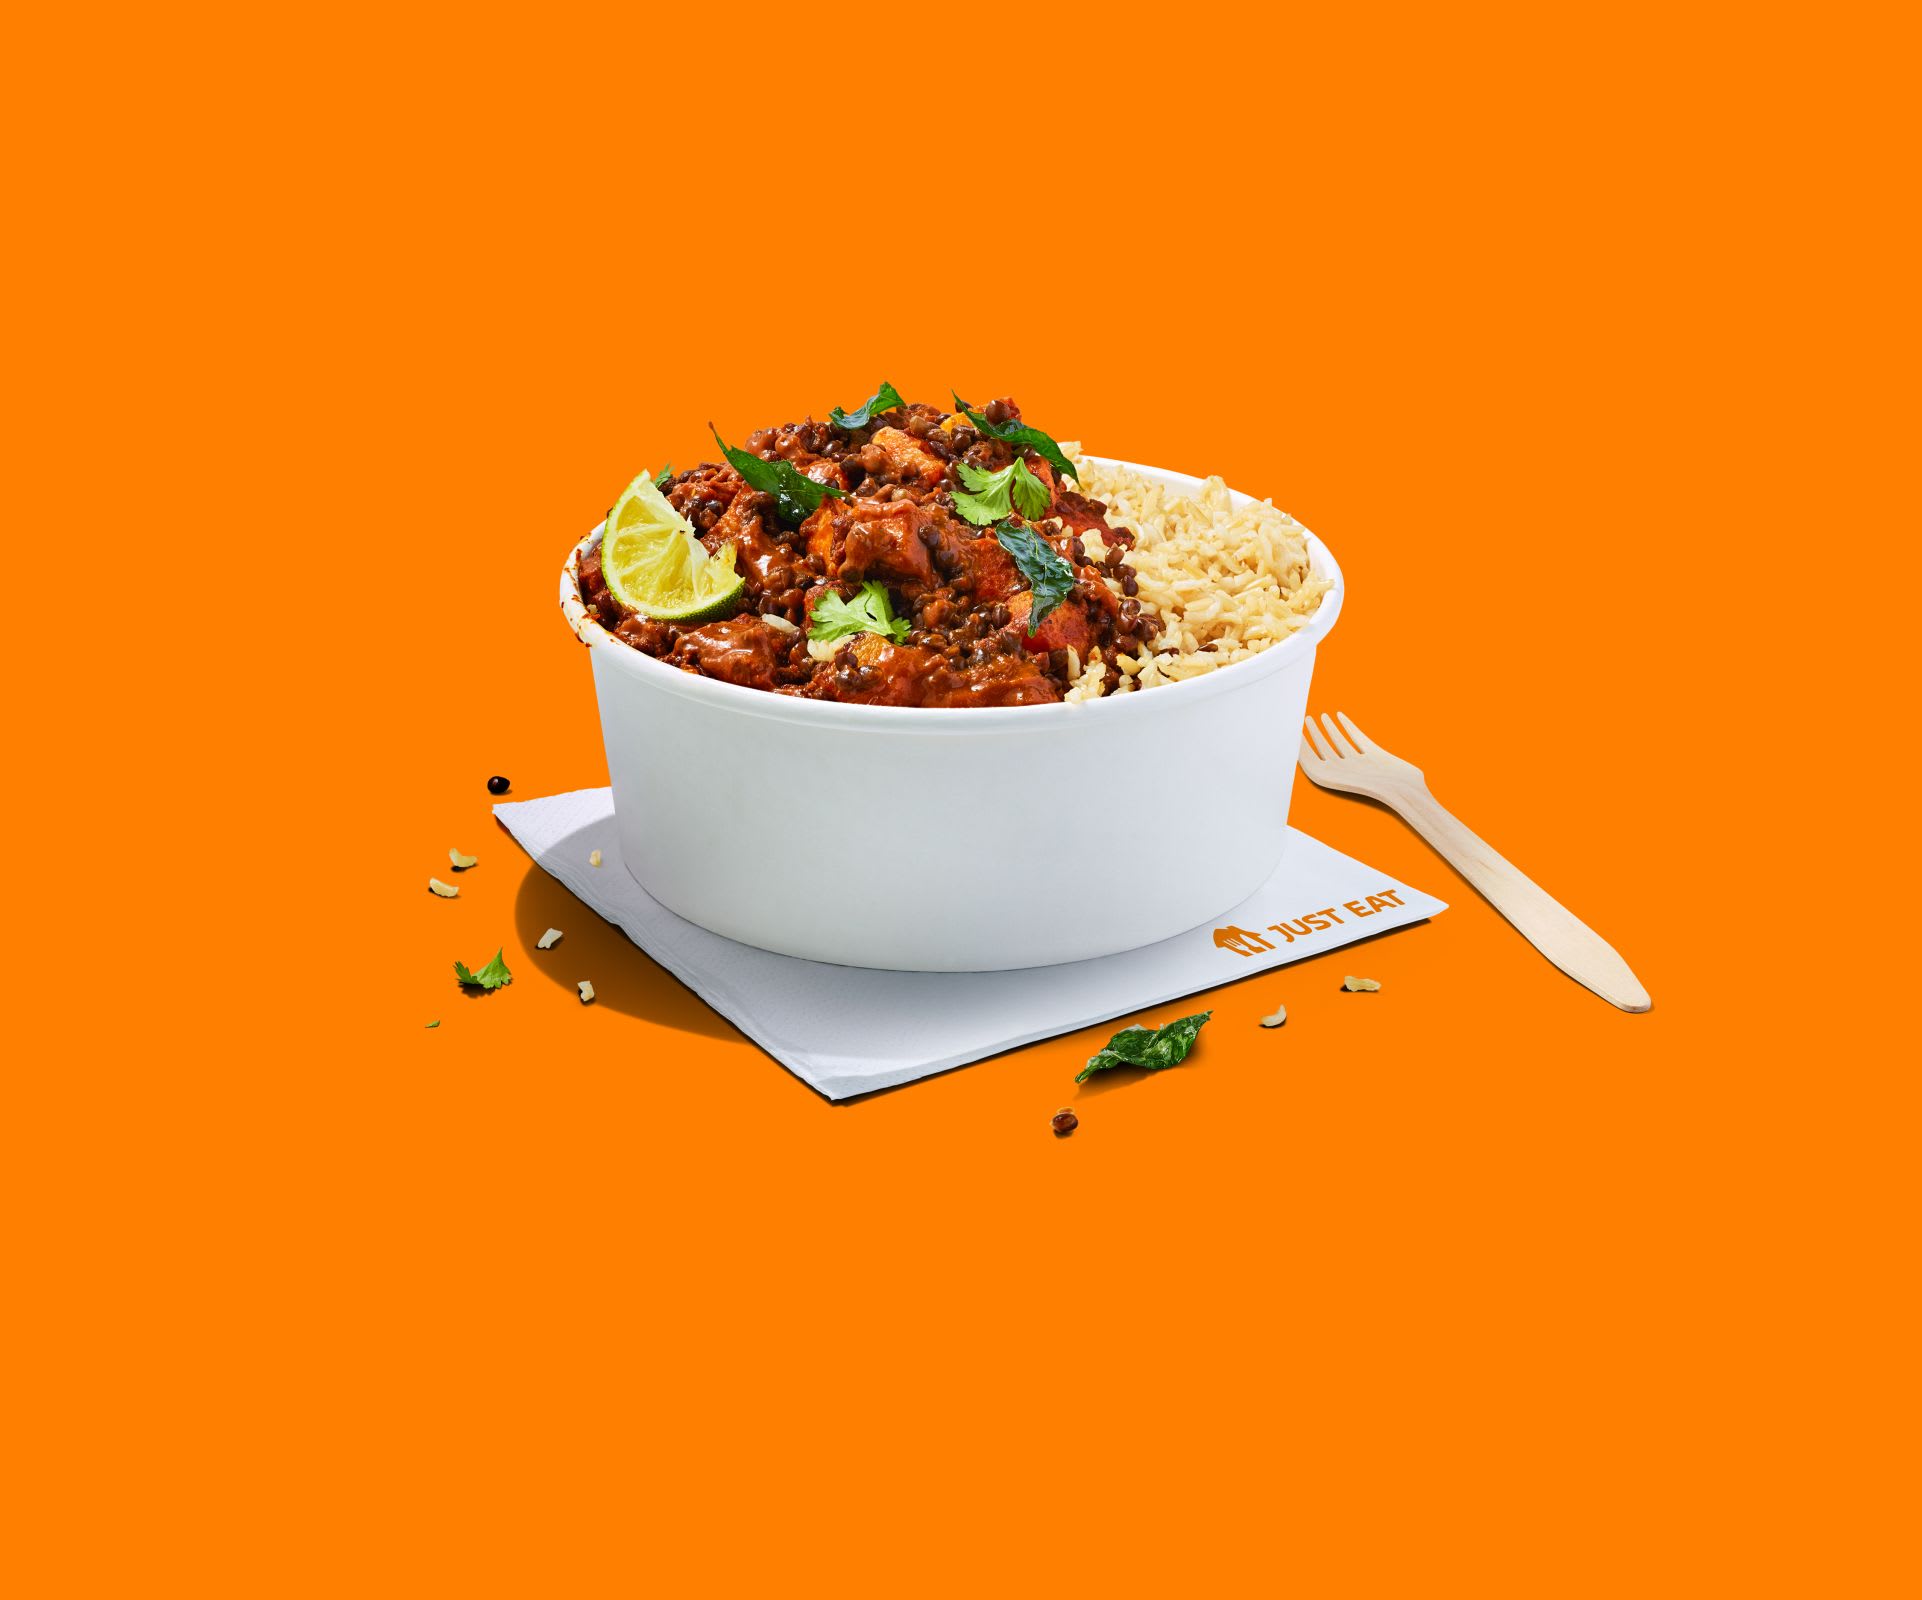 Biryani Takeaways and Restaurants Delivering Near Me | Order from Just Eat